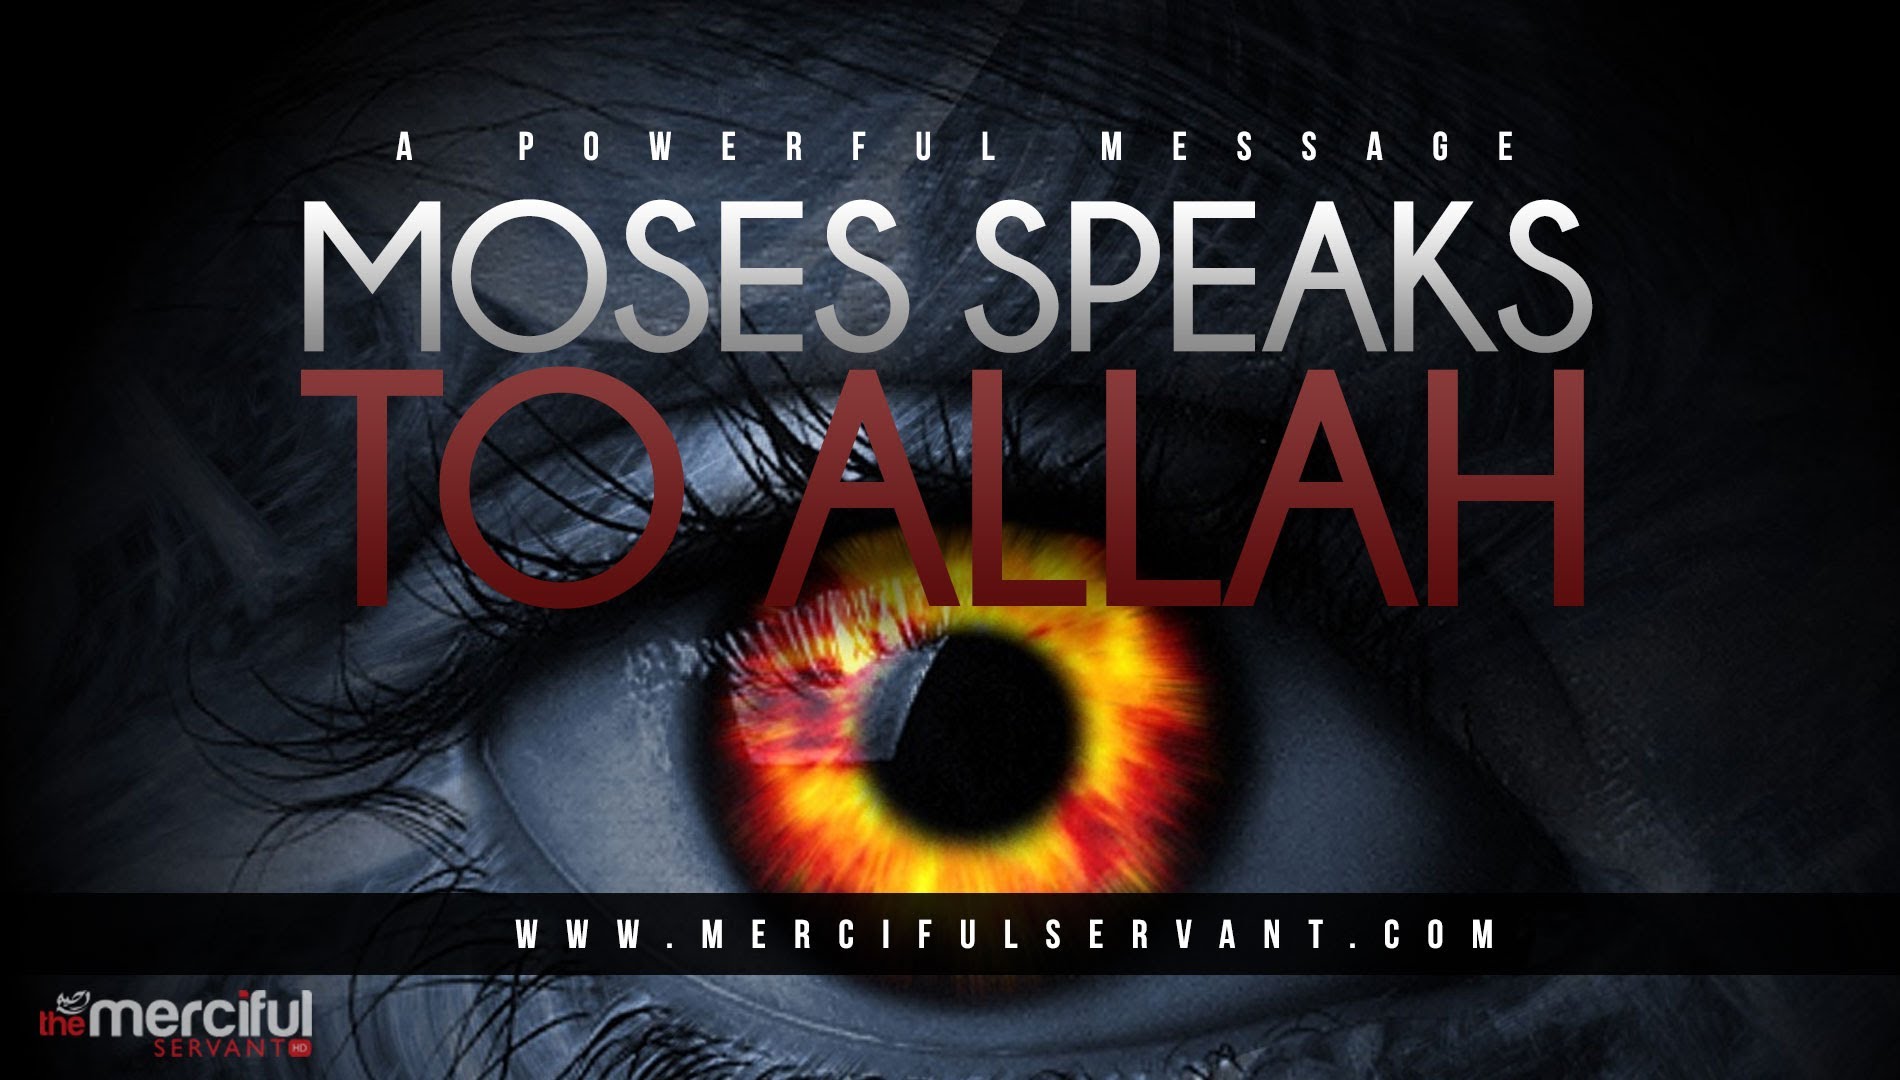 Moses Speaks to Allah - Powerful Message